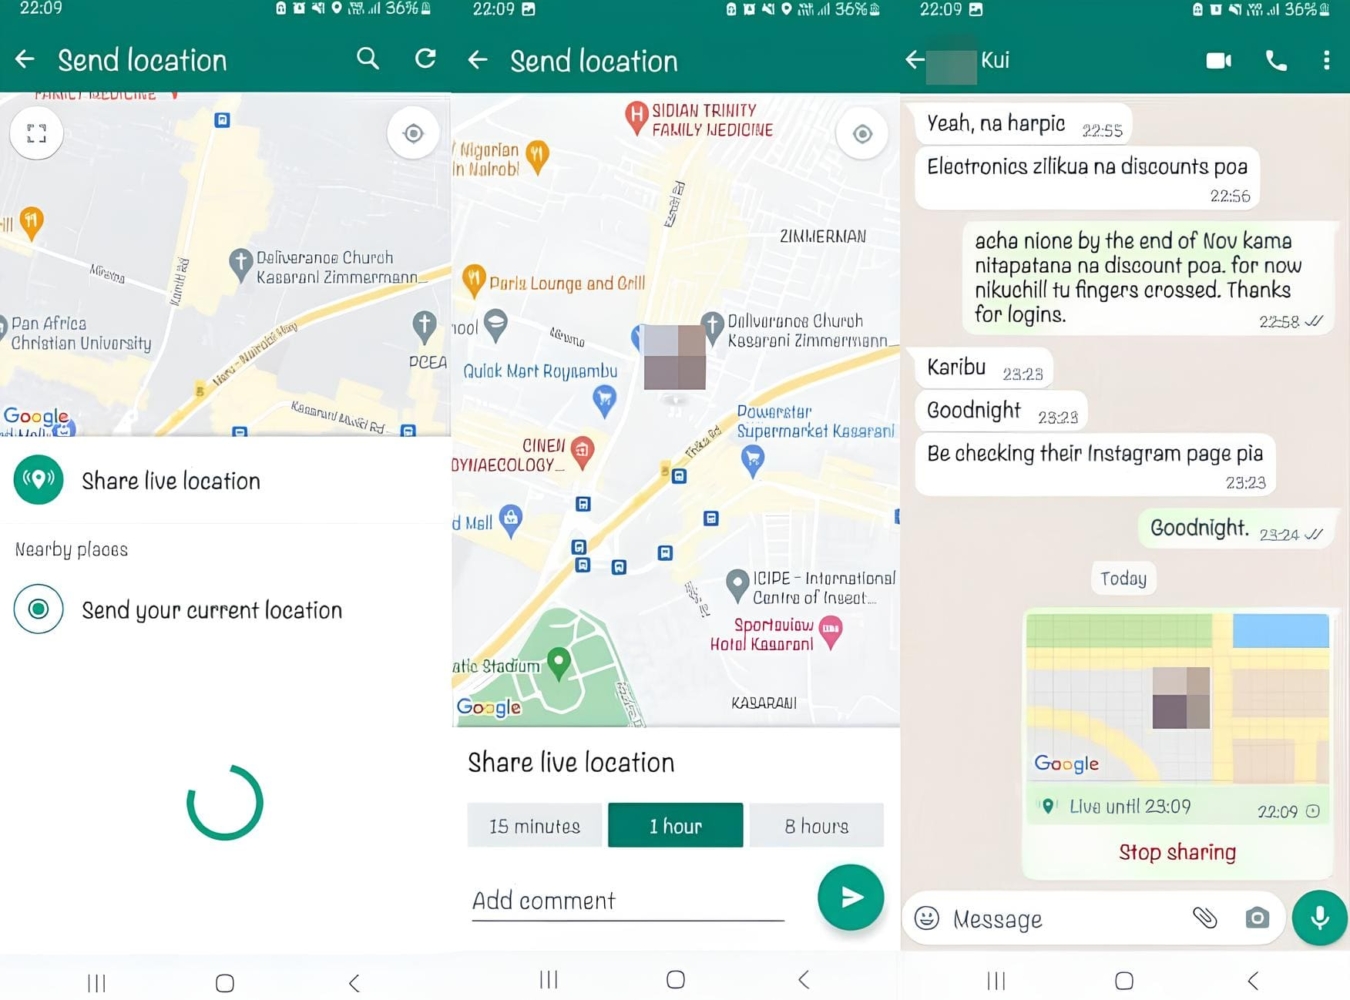 An image of the live location sharing feature on the WhatsApp messaging app